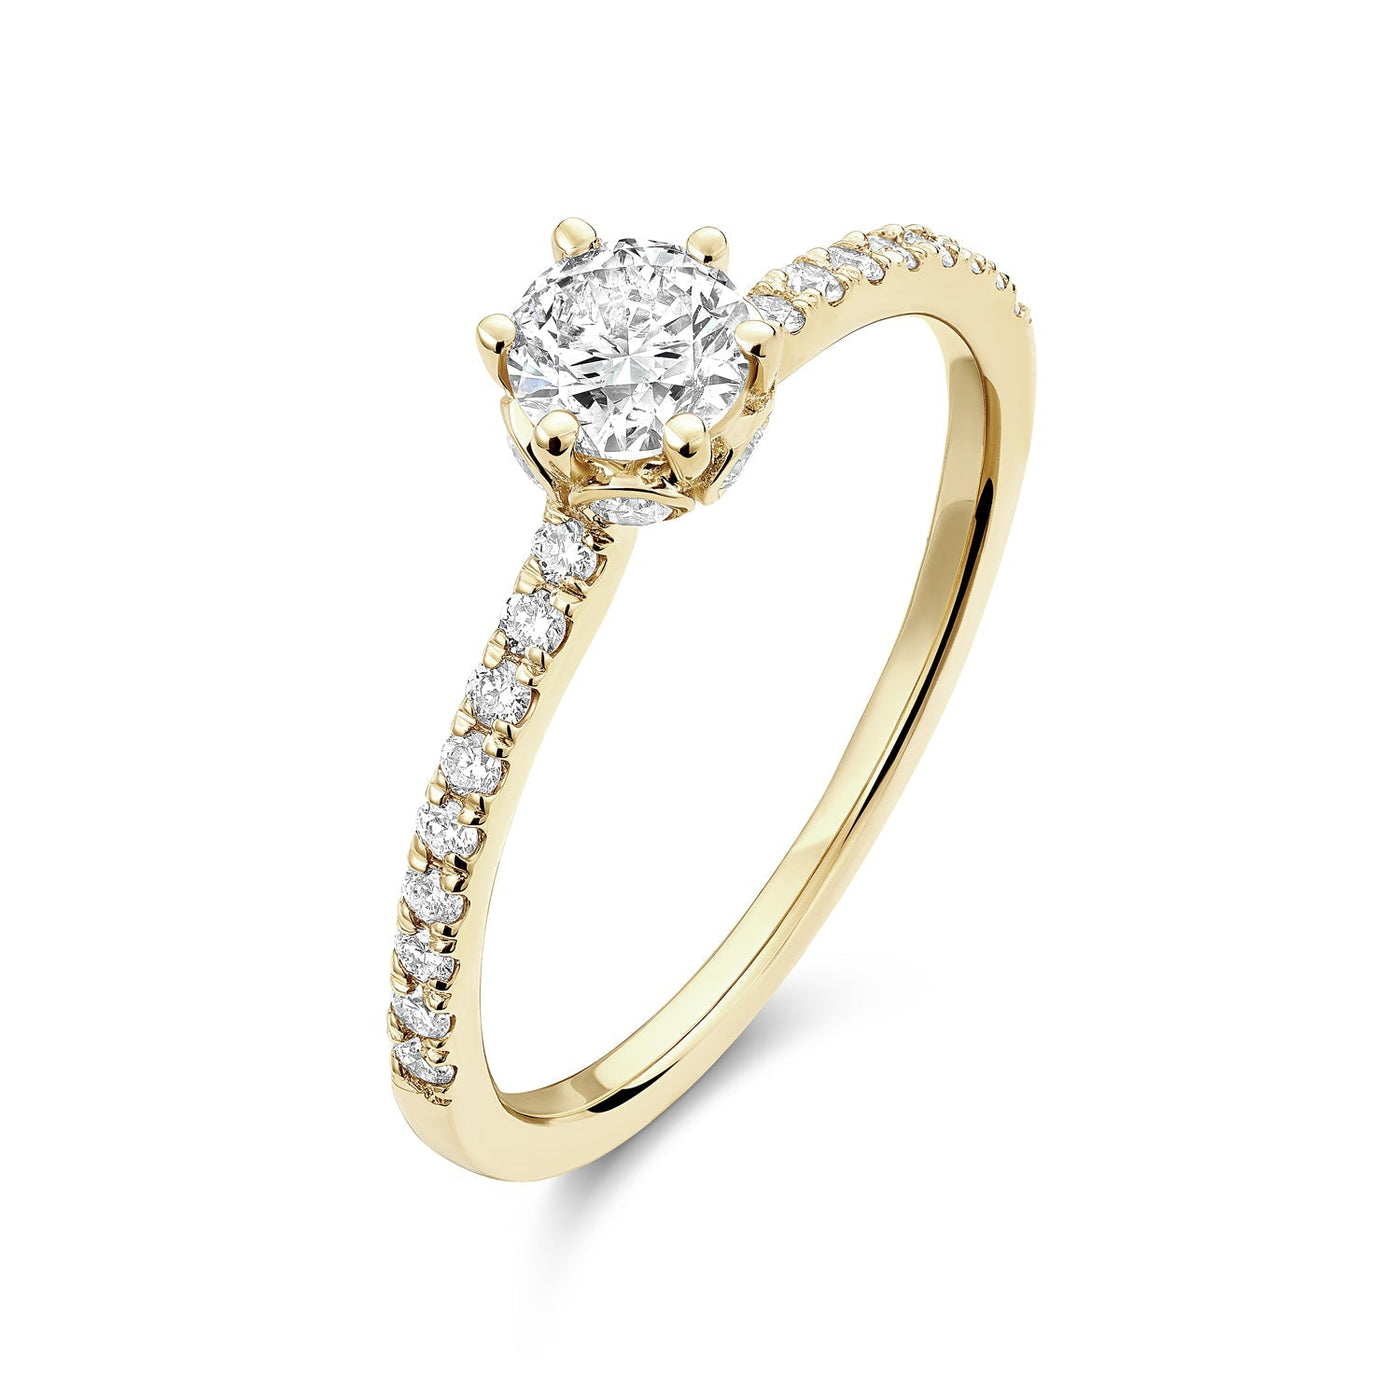 Solitaire Crown Setting Diamond Engagement Ring